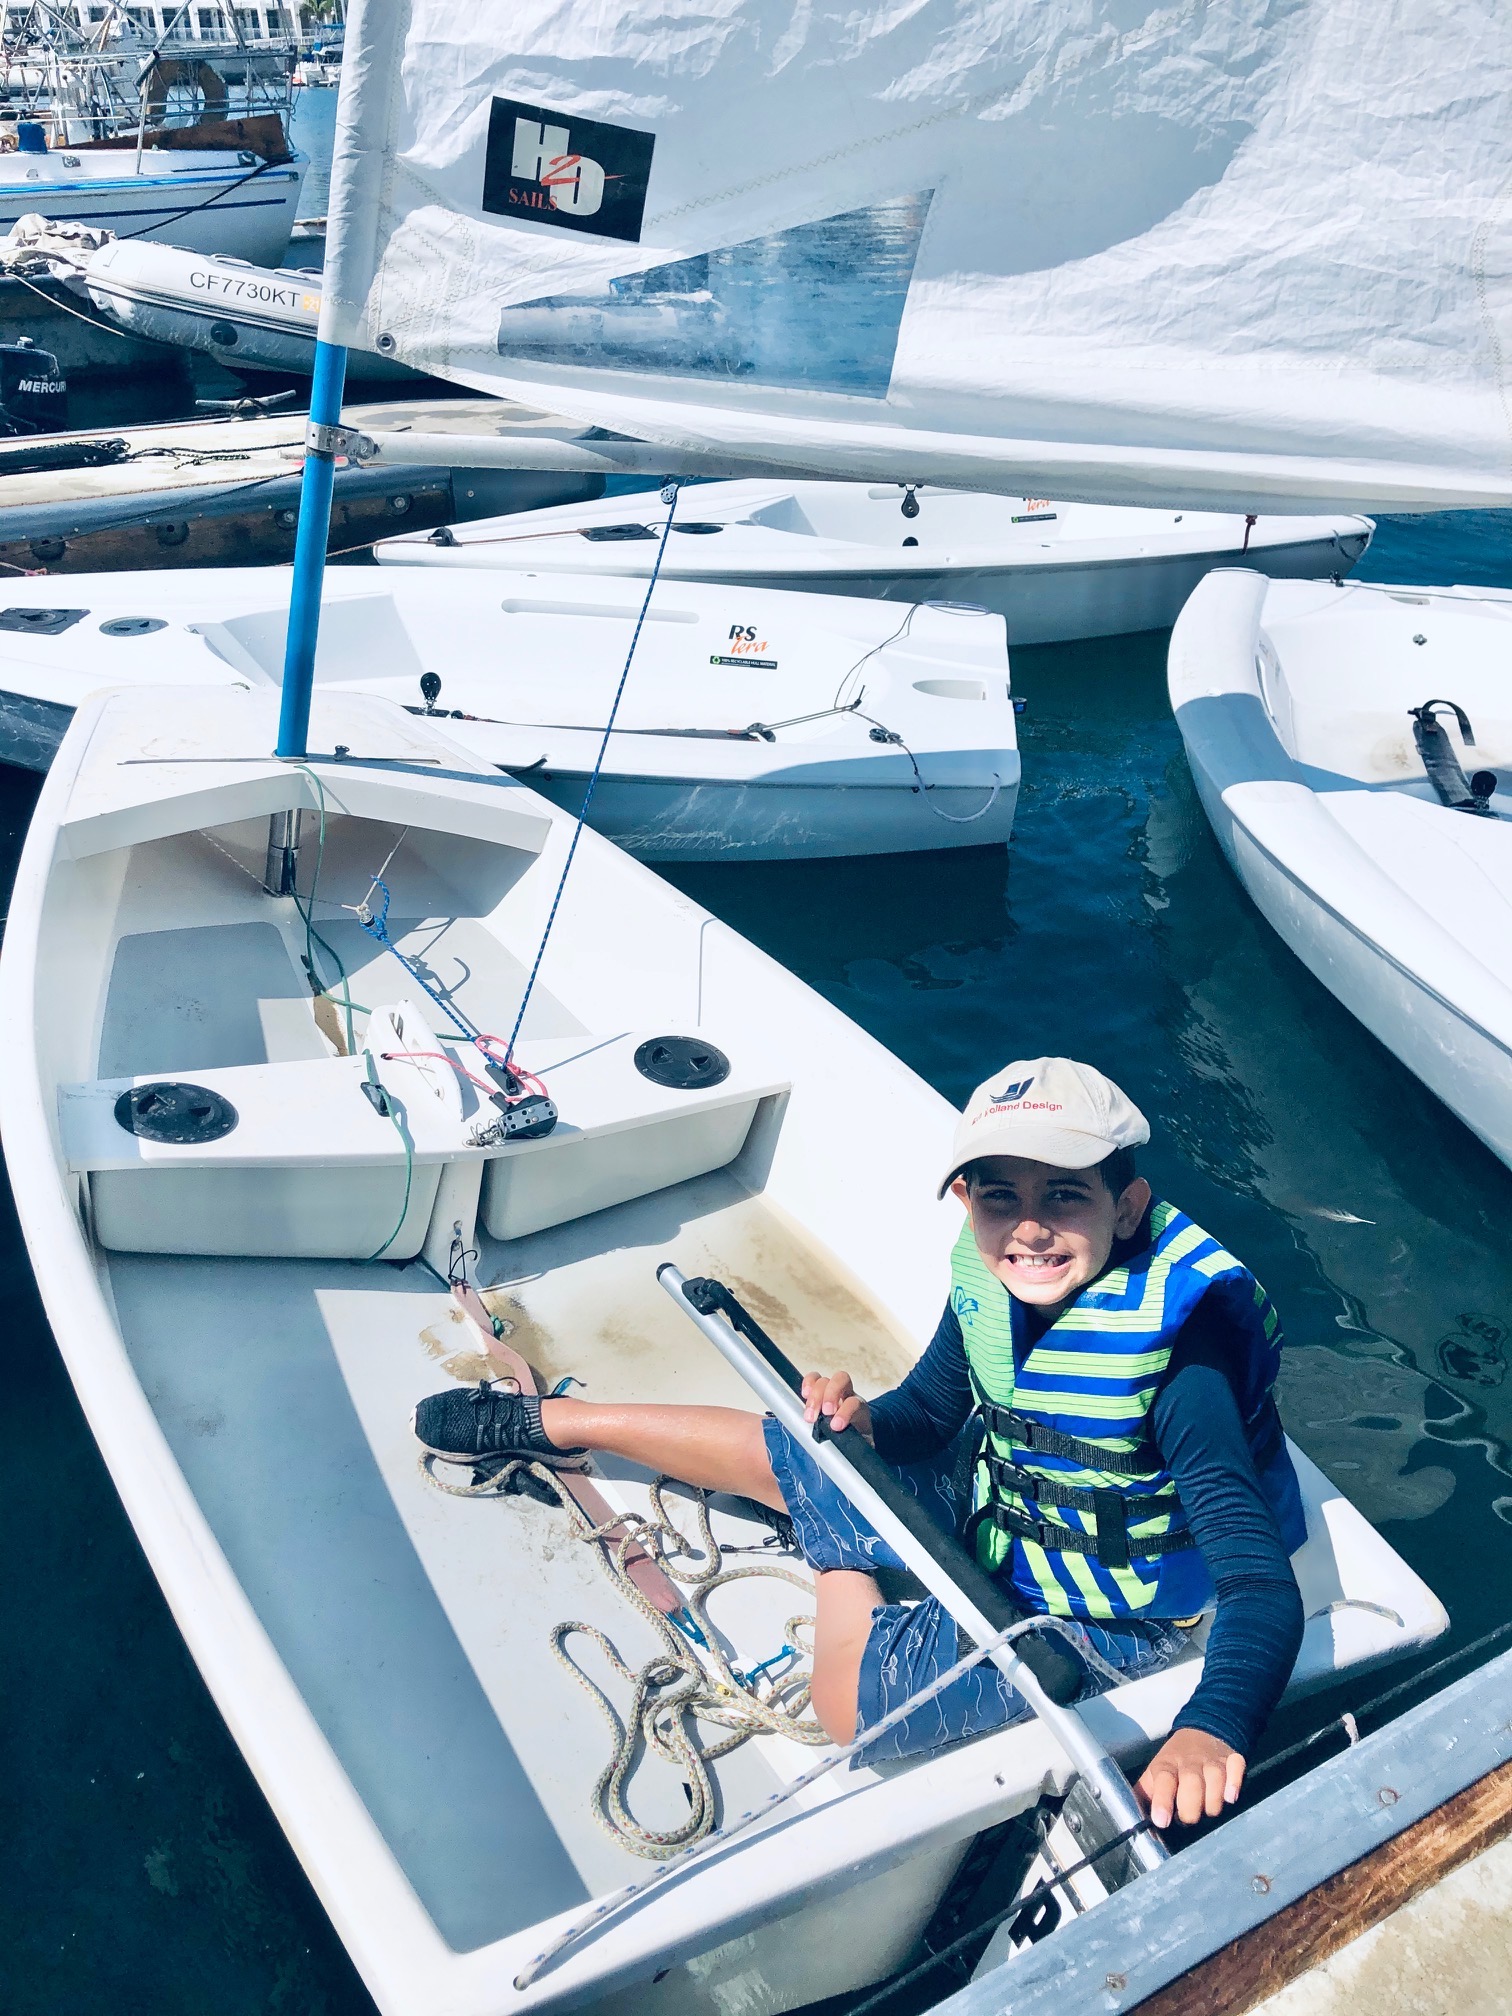 Wearing a Ron Holland Design hat young sailor ready to sail as he sits in his boat among a flotilla